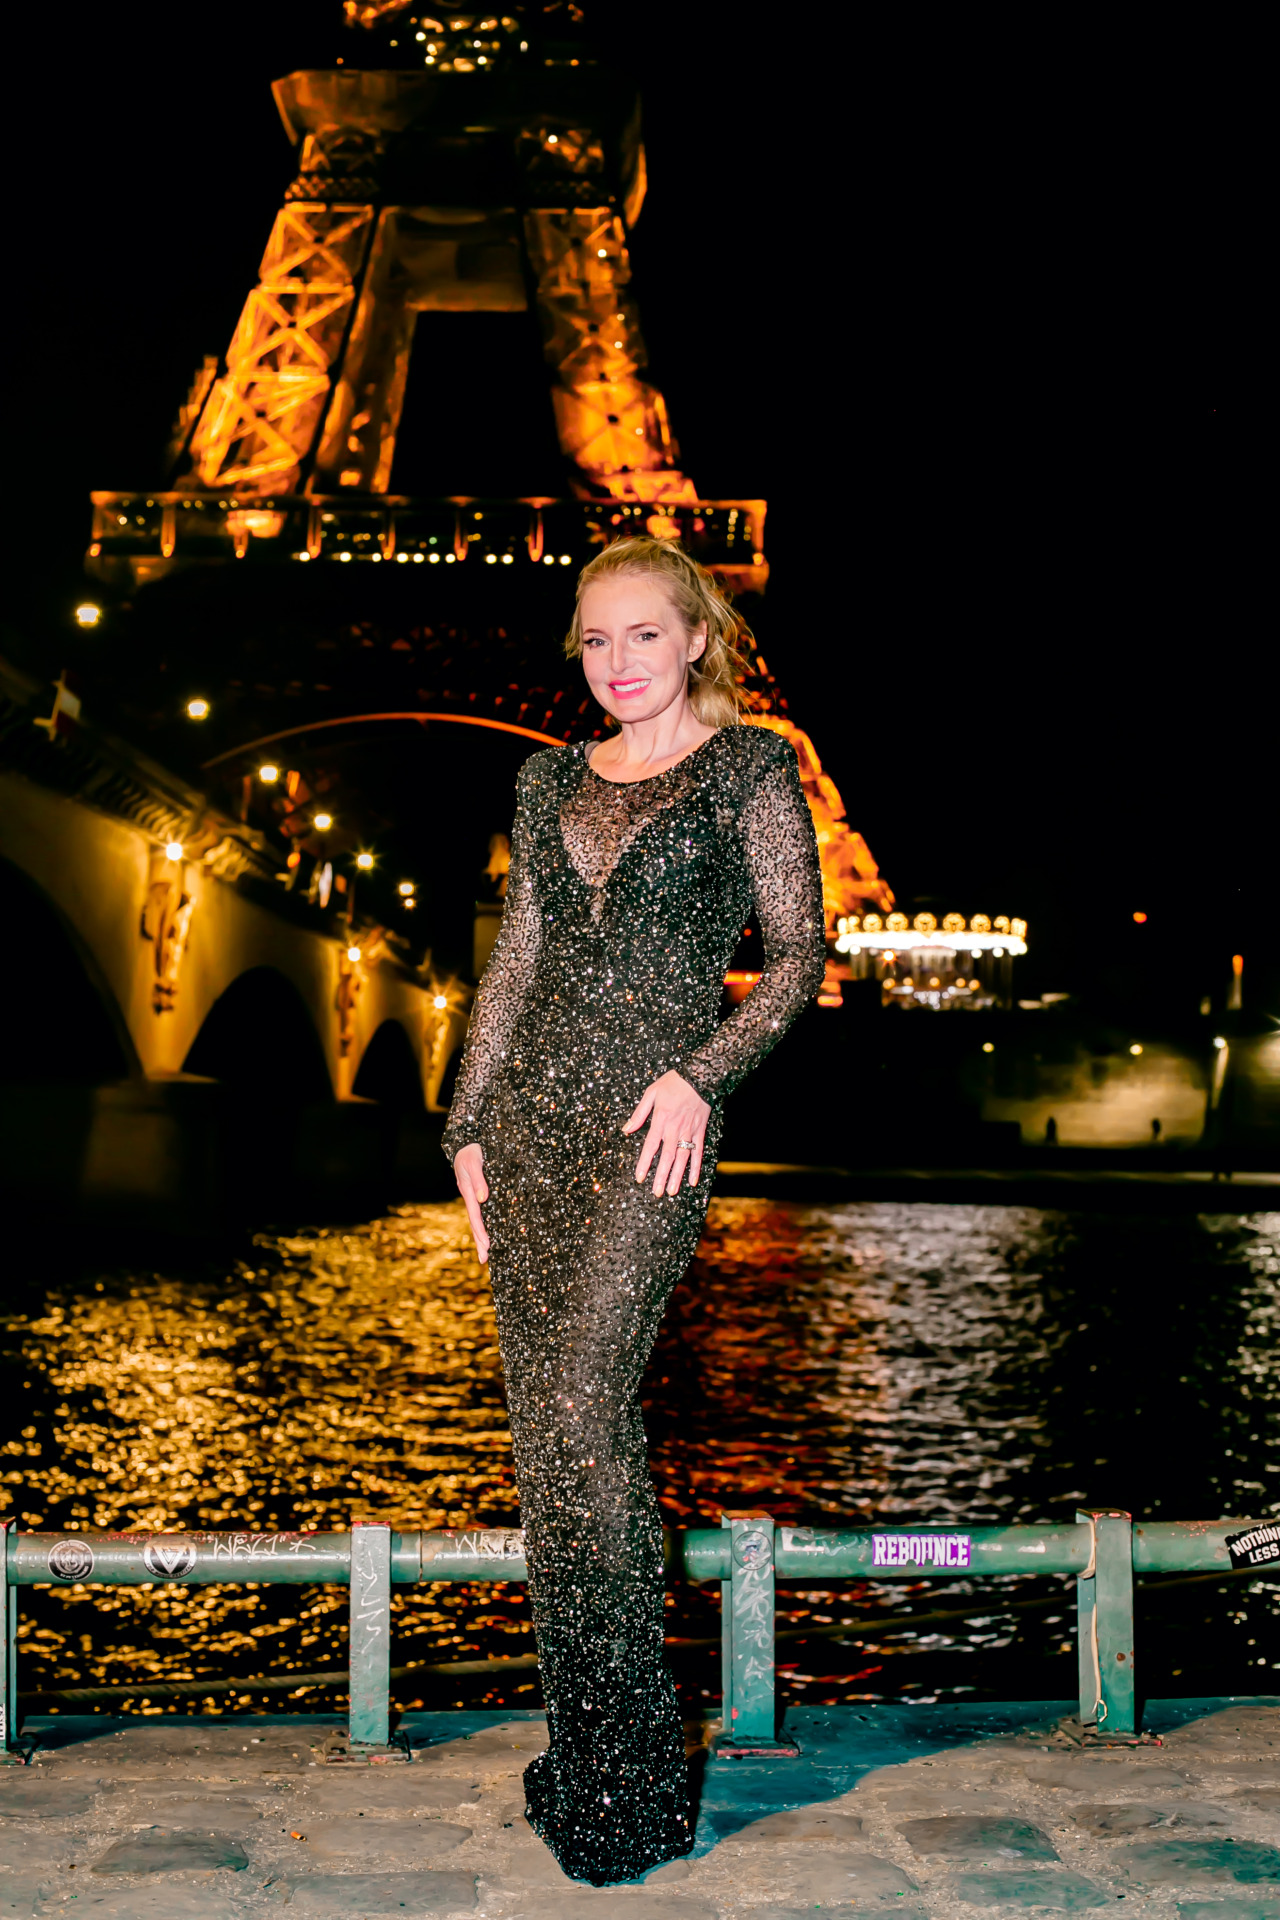 what to pack for paris, what to pack for paris fashion week, paris fashion week packing list, what I wore at paris fashion week, what I pack for a trip to paris, paris packing list, paris in febraury, erin busbee, busbee style, fashion over 40, paris, france, retrofete sheer sequin dress